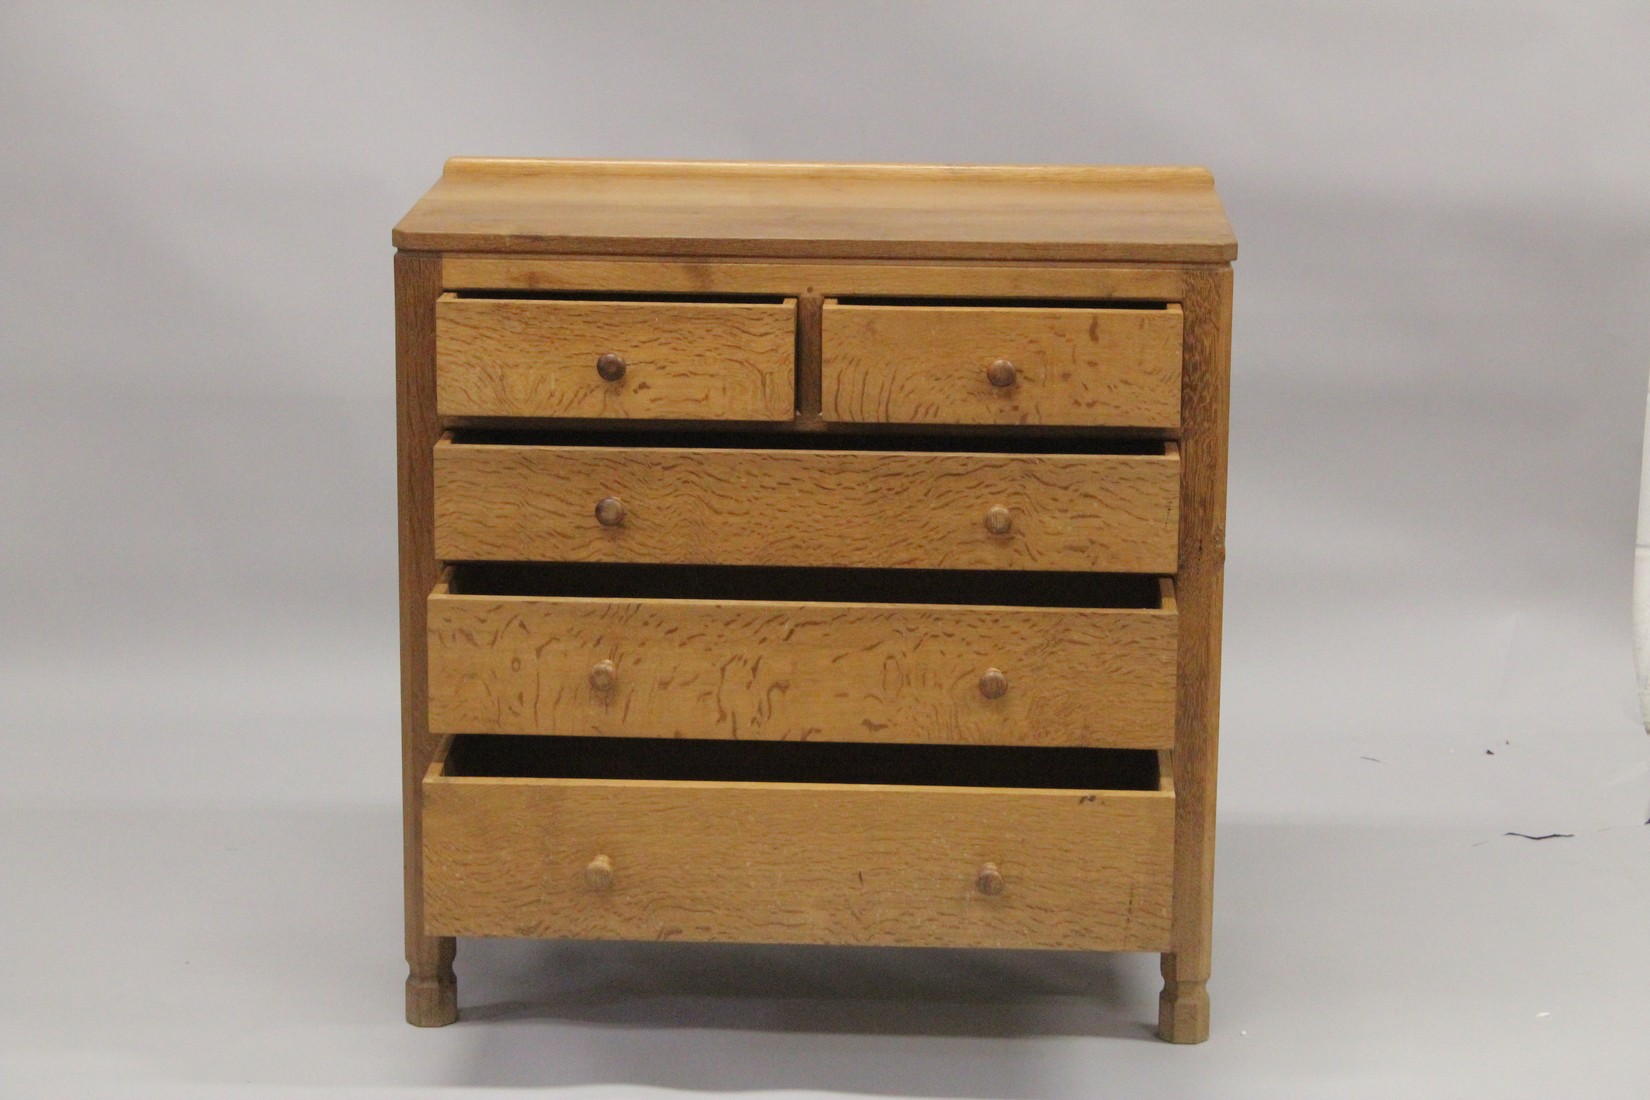 ROBERT "MOUSEMAN" THOMPSON. AN OAK CHEST OF DRAWERS, with adzed rectangular top, panelled ends, - Image 2 of 5